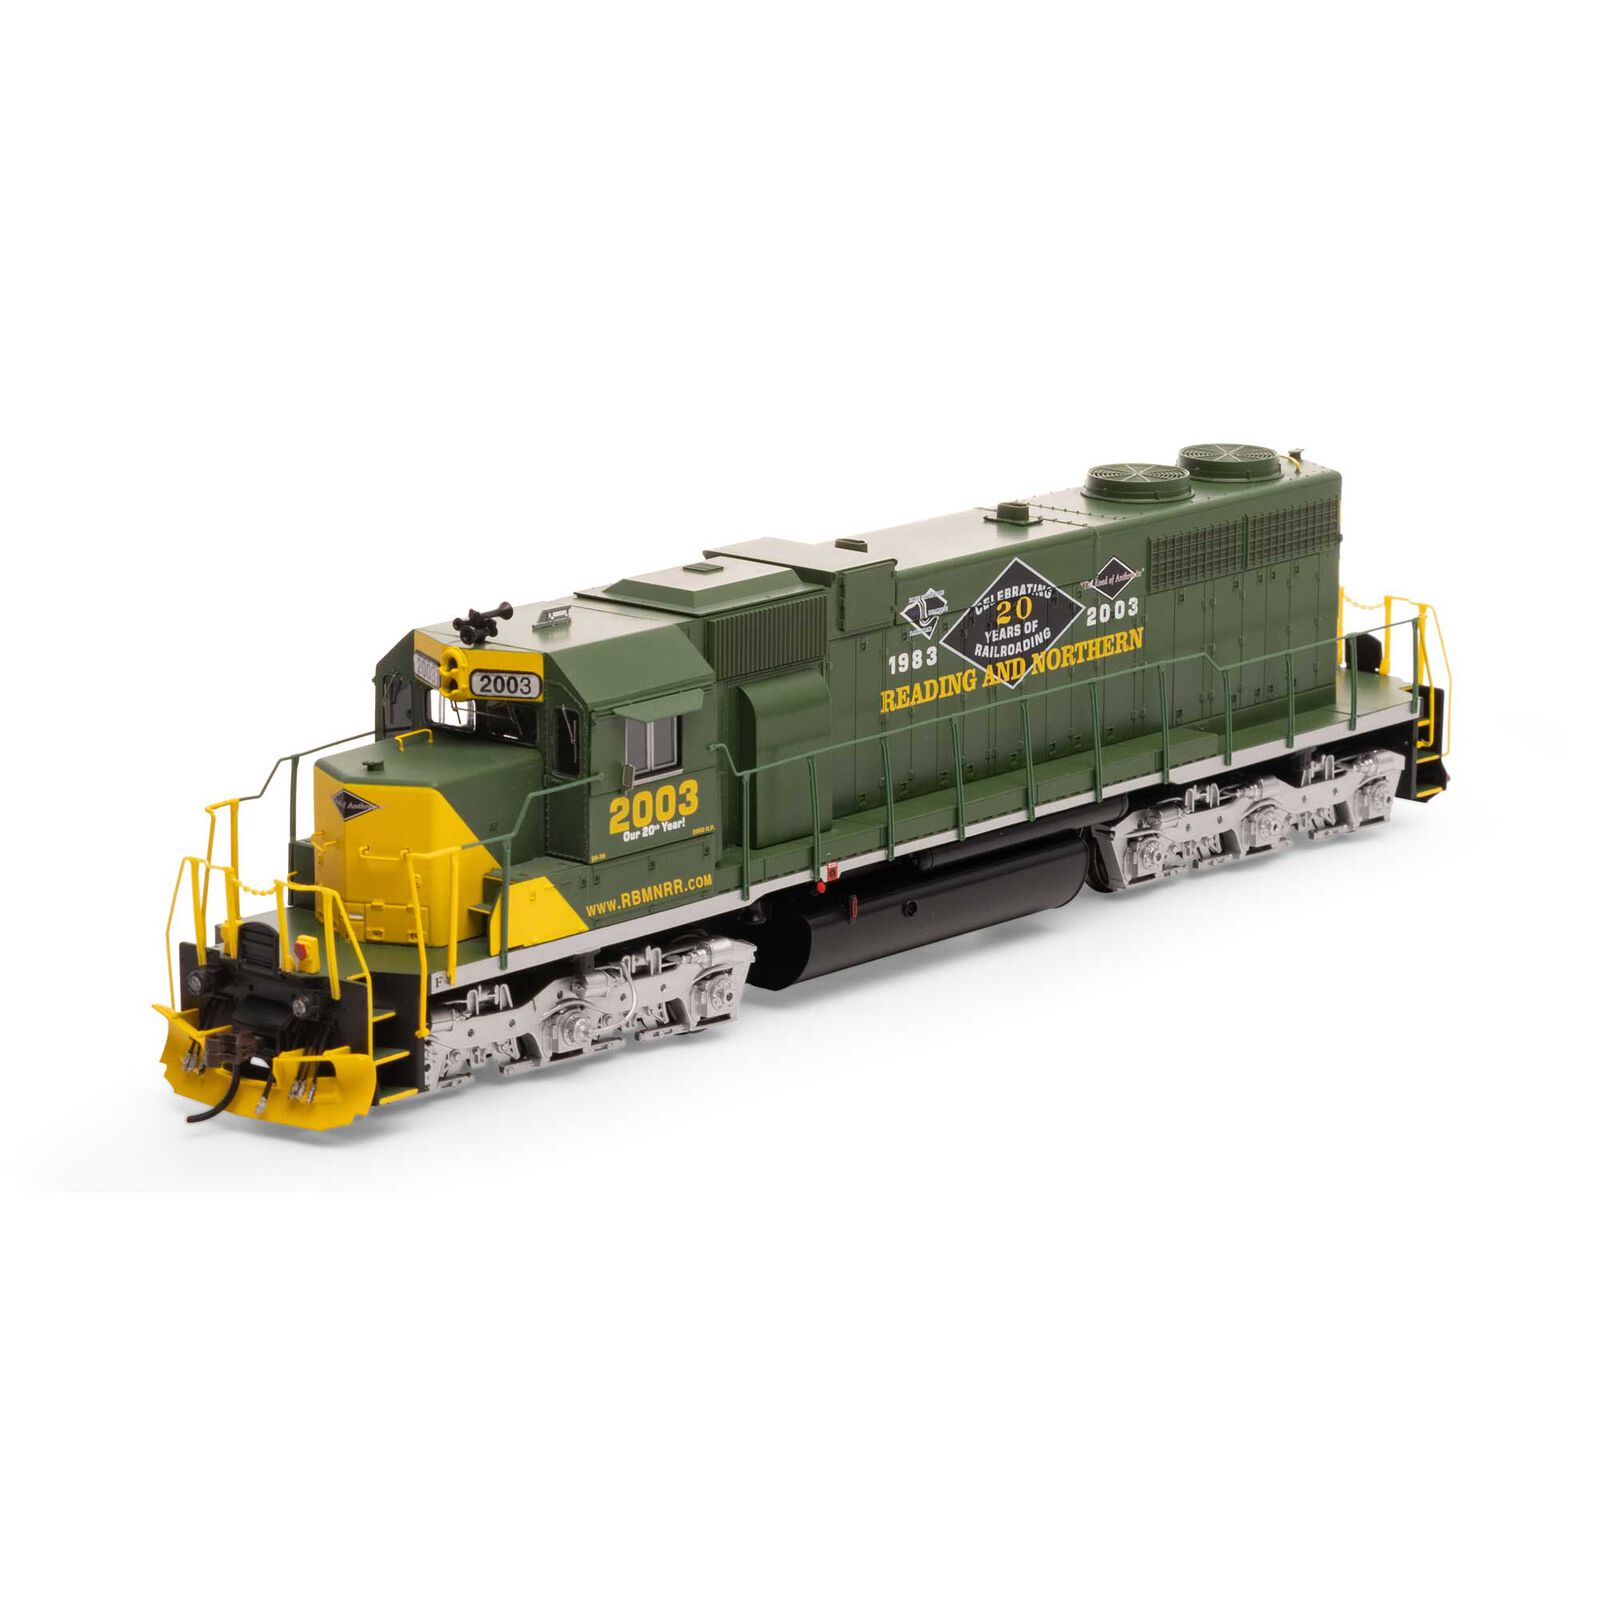 HO RTR SD38 with DCC & Sound, RBMN #2003